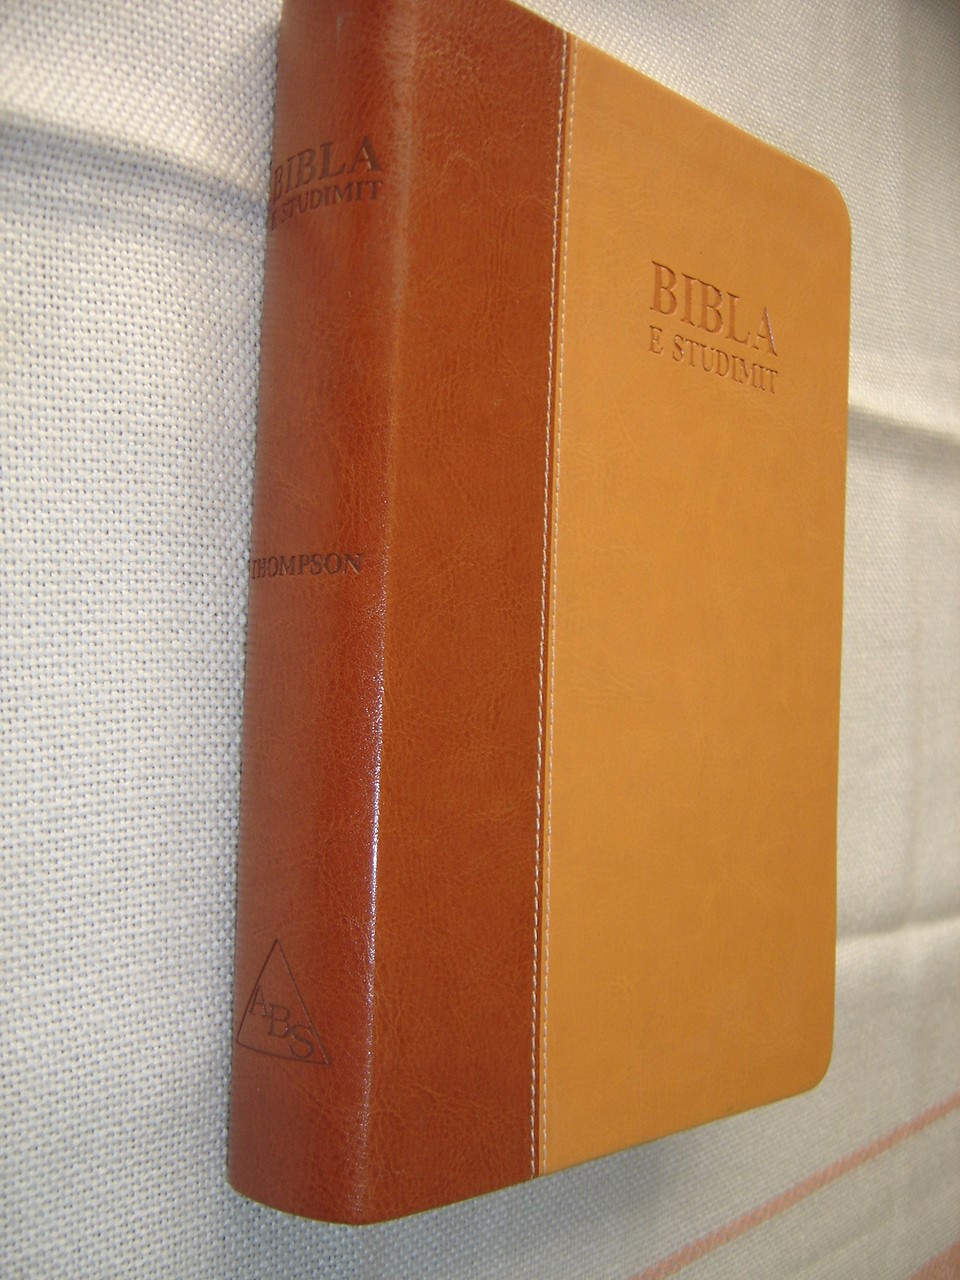 Holy bible leather thumb index study